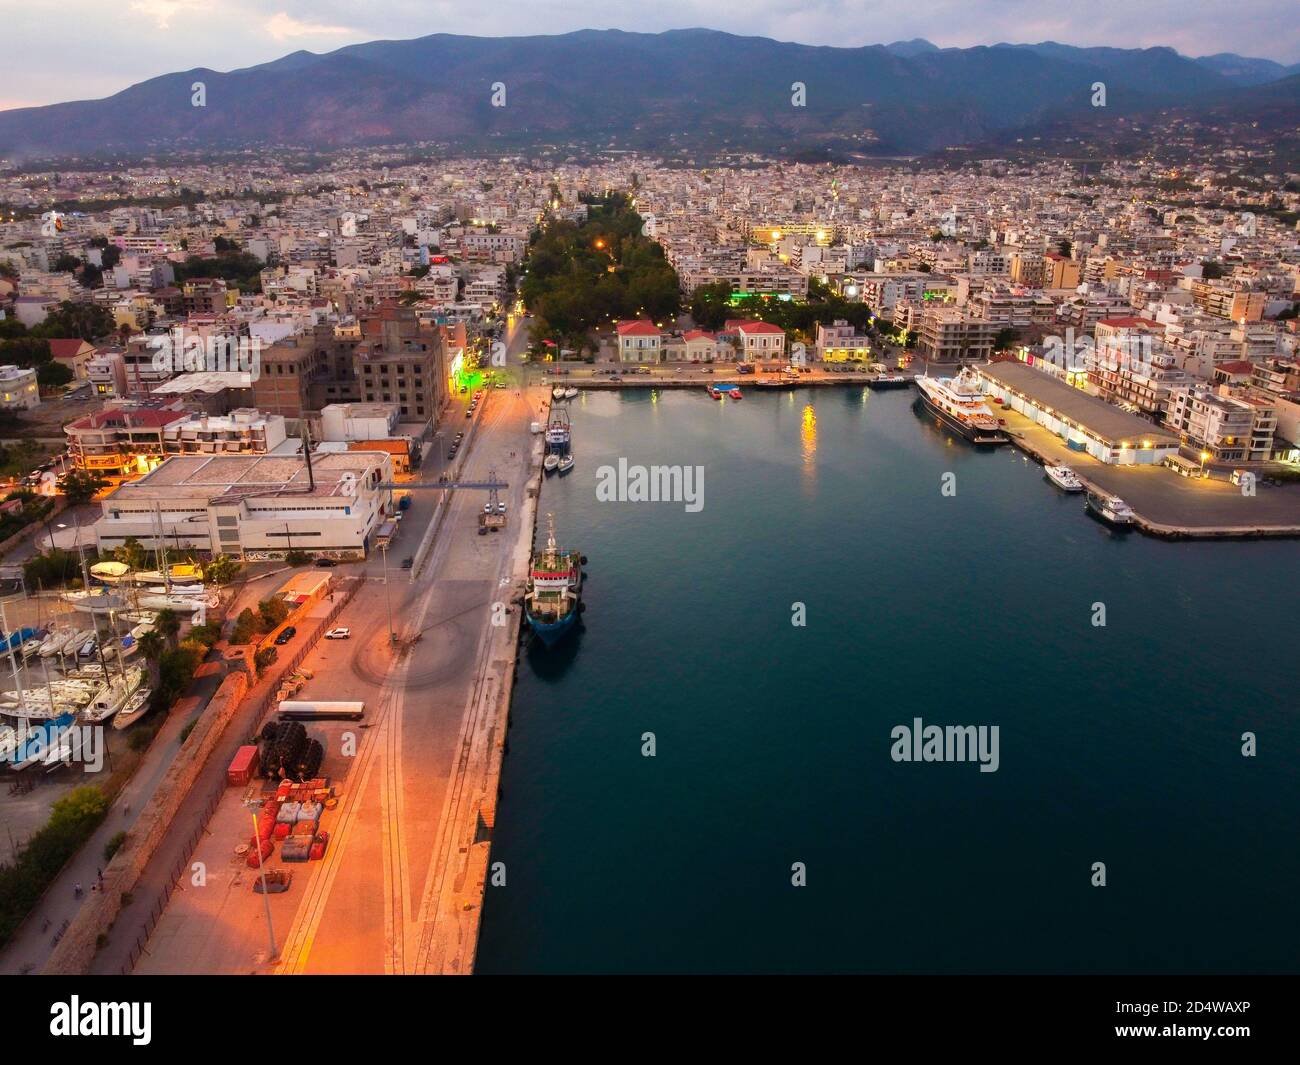 Aerial view of Kalamata port at dusk, one of the biggest ports in Peloponnese, Greece Stock Photo